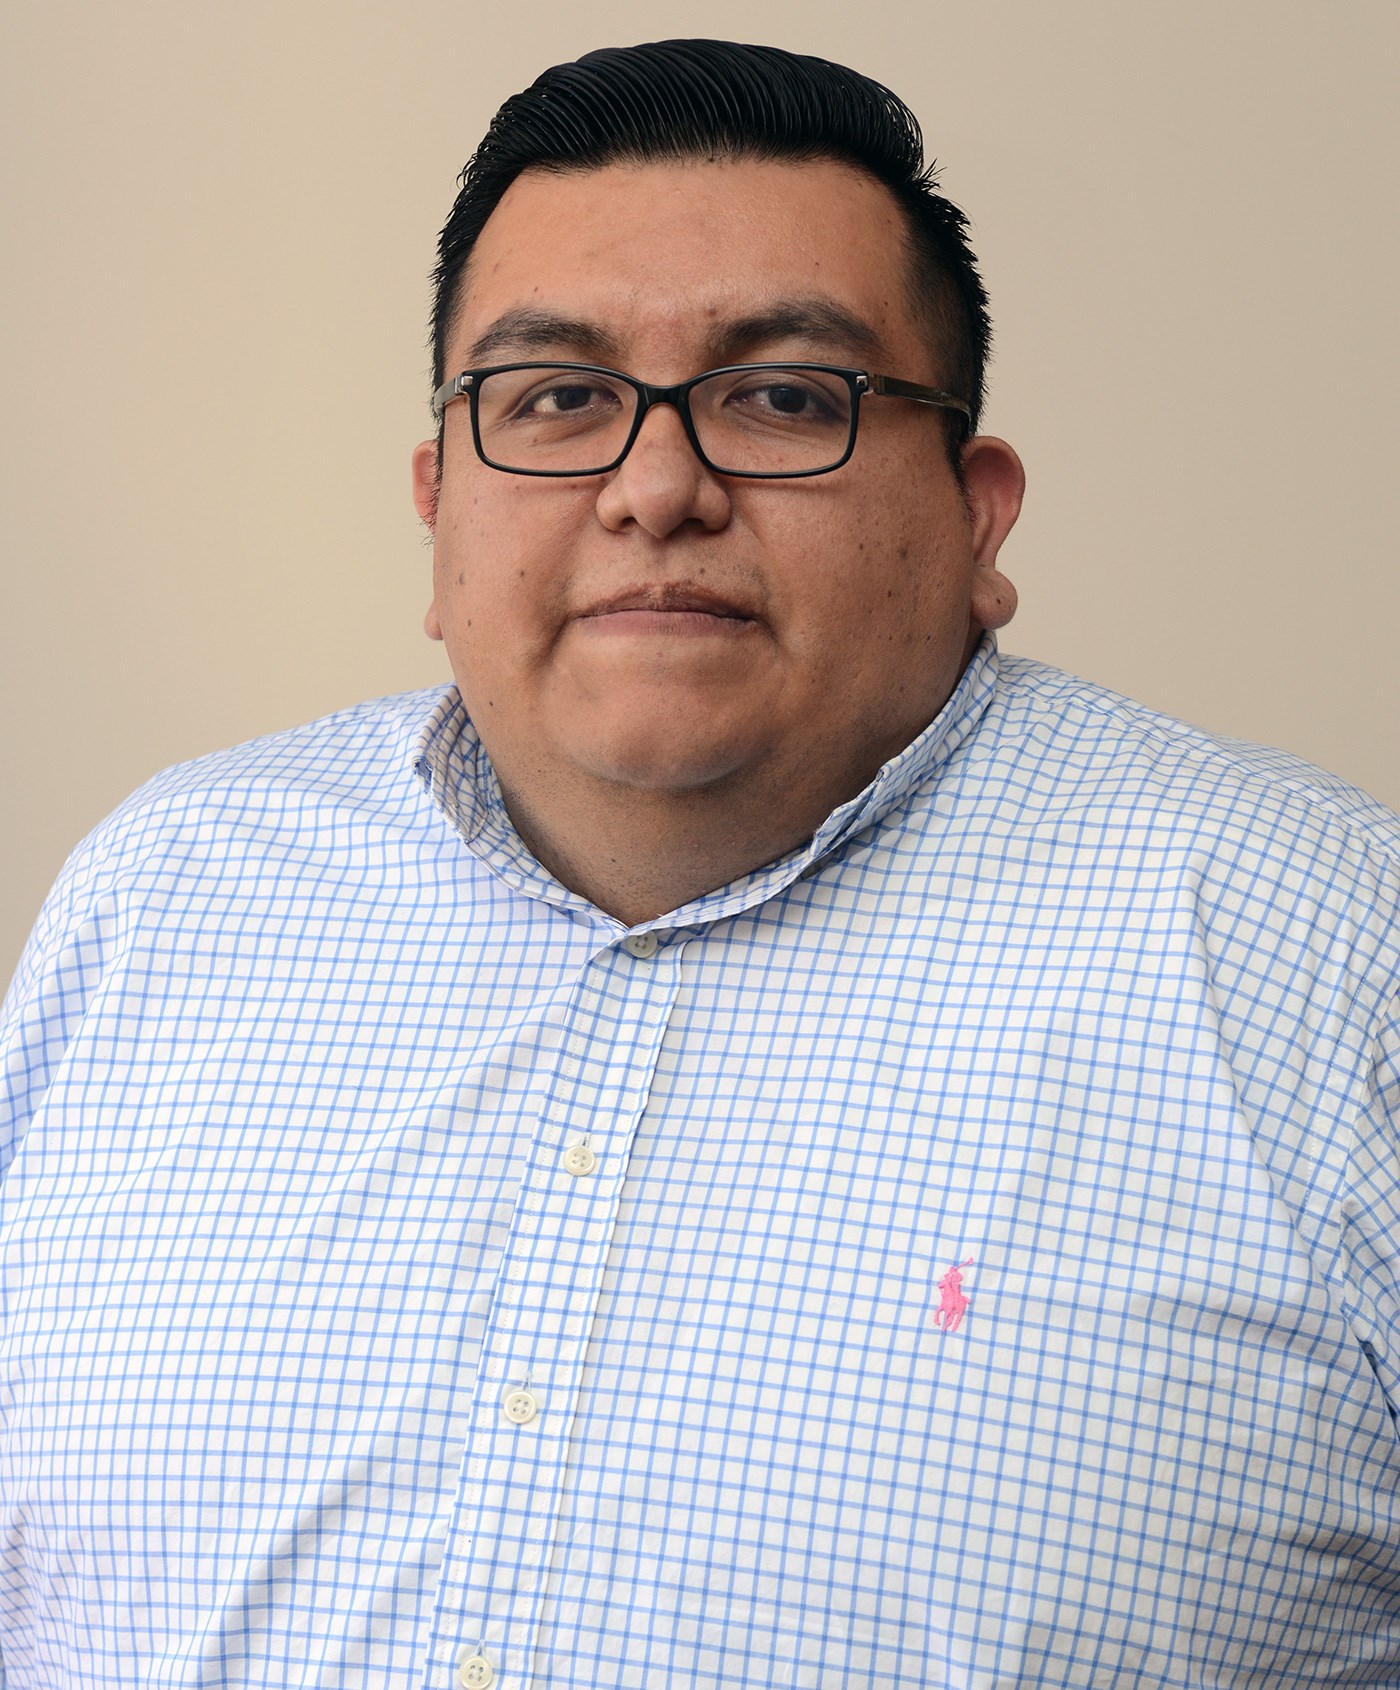 Jose Guerrero is a Data Analyst in the International Students & Scholars Office at UMass Lowell.